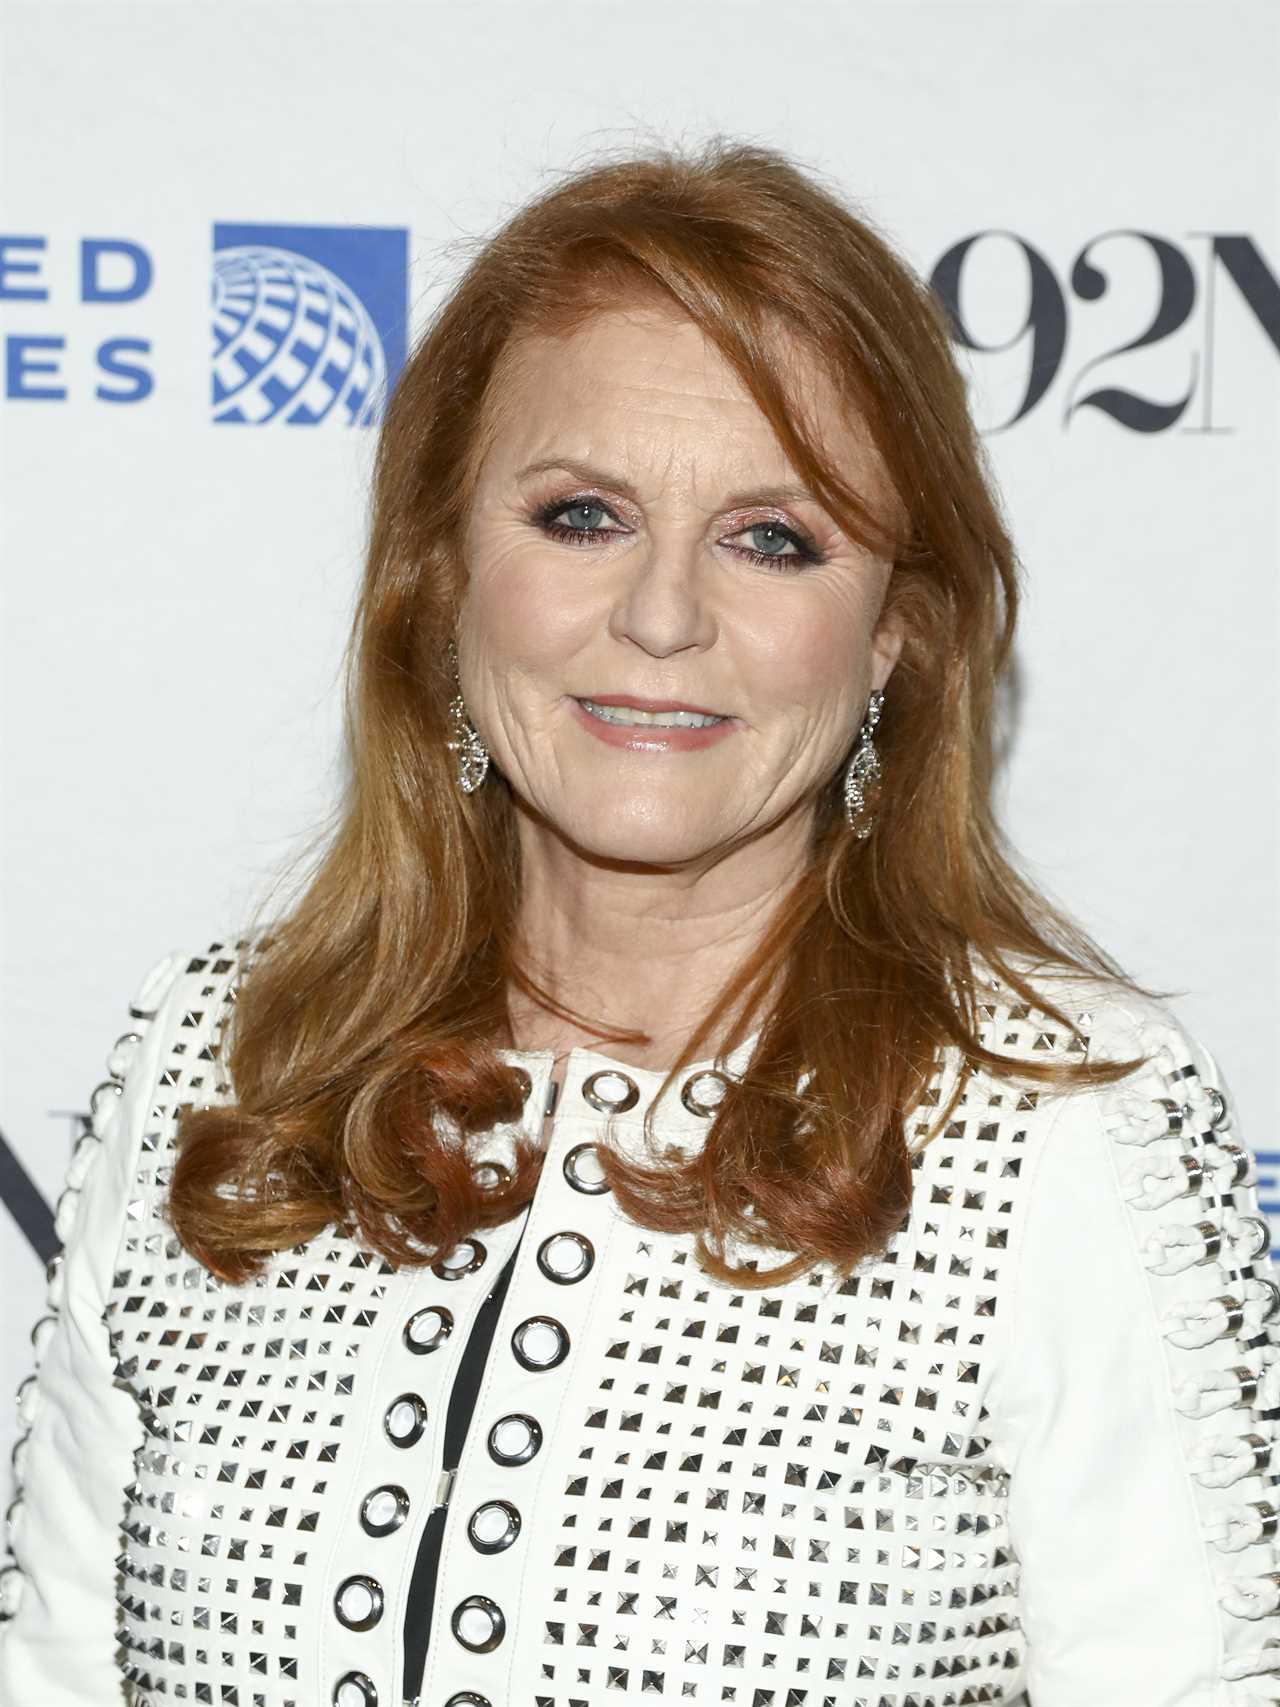 Sarah Ferguson reveals her skin cancer has stopped spreading after surgery